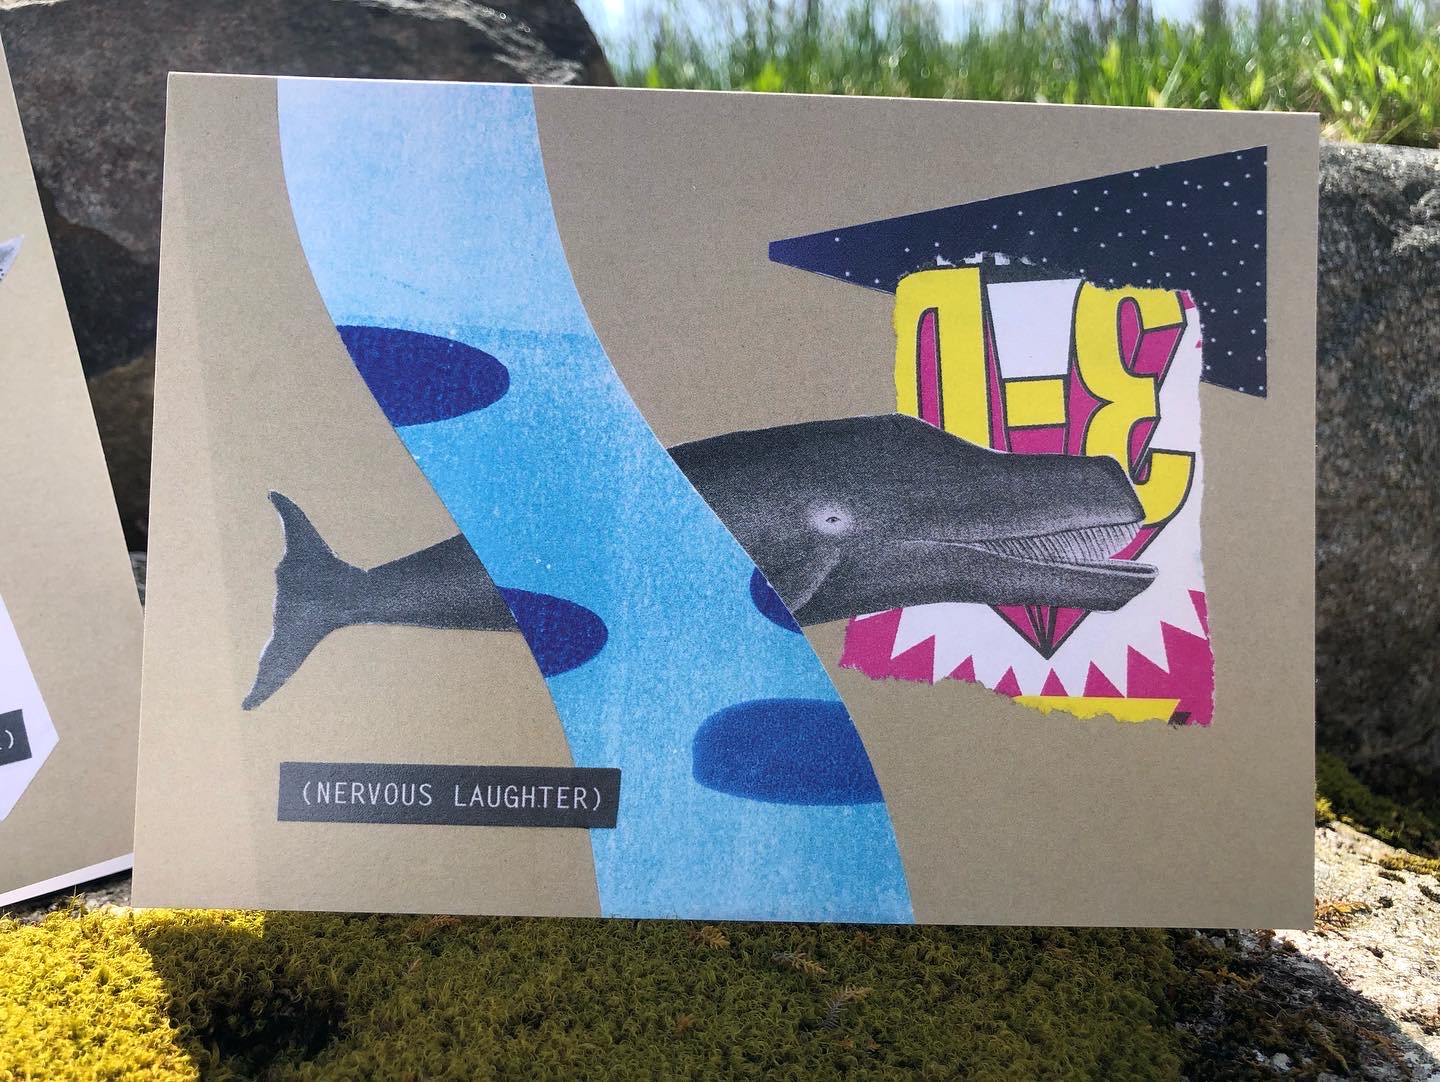 The Nervous Laughter Whale card, standing in the sunlight on a mossy boulder. A black-and-white whale with a big grin swims among cut and torn pieces in bright colors, including a blue wave, night sky with stars, and torn bit from a hot pink and yellow ad for 3D glasses. A closed caption–style title in the lower left says Nervous Laughter in all caps.